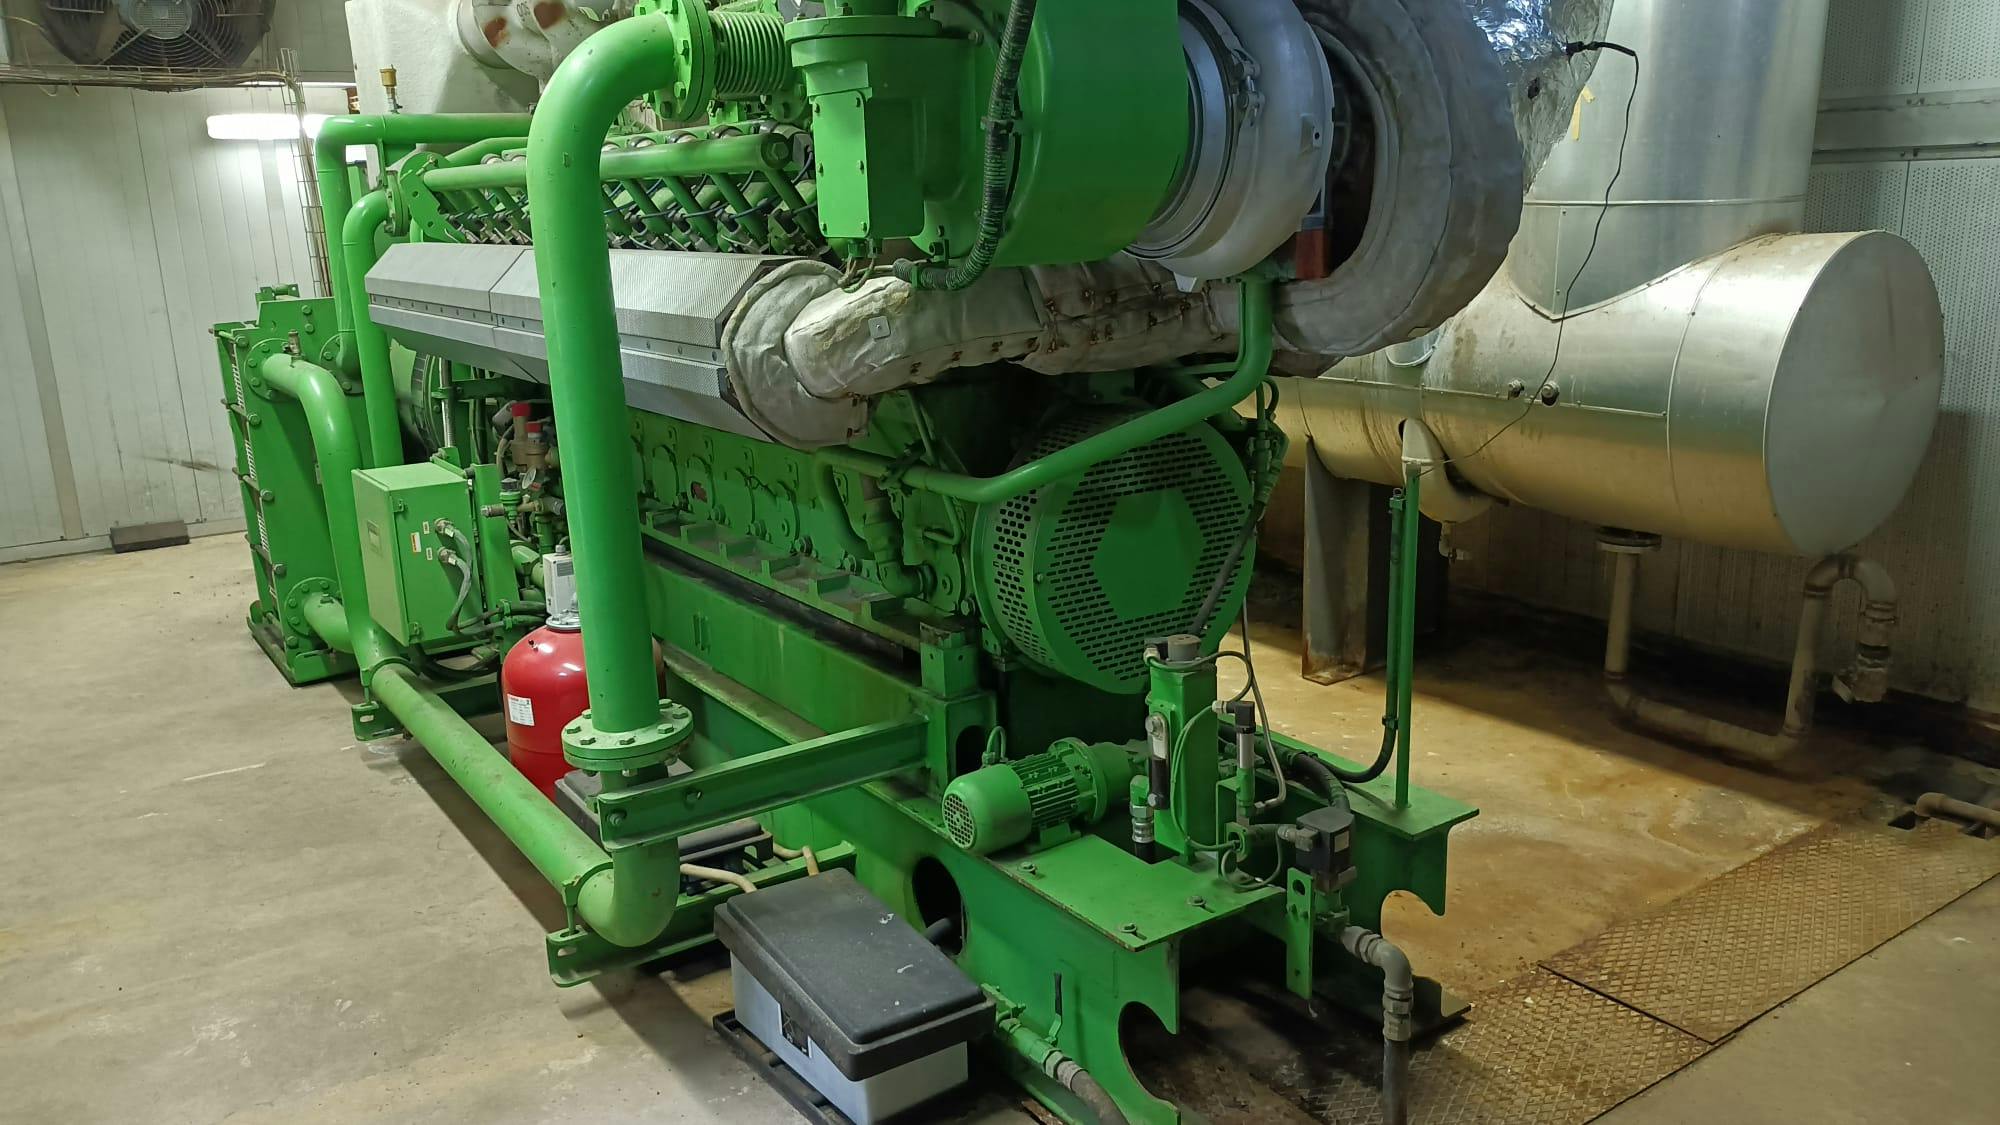 nullPhoto of Jenbacher 320 G.S N-L Natural Gas Generator Set showing gas engine and gas line - used gas generator